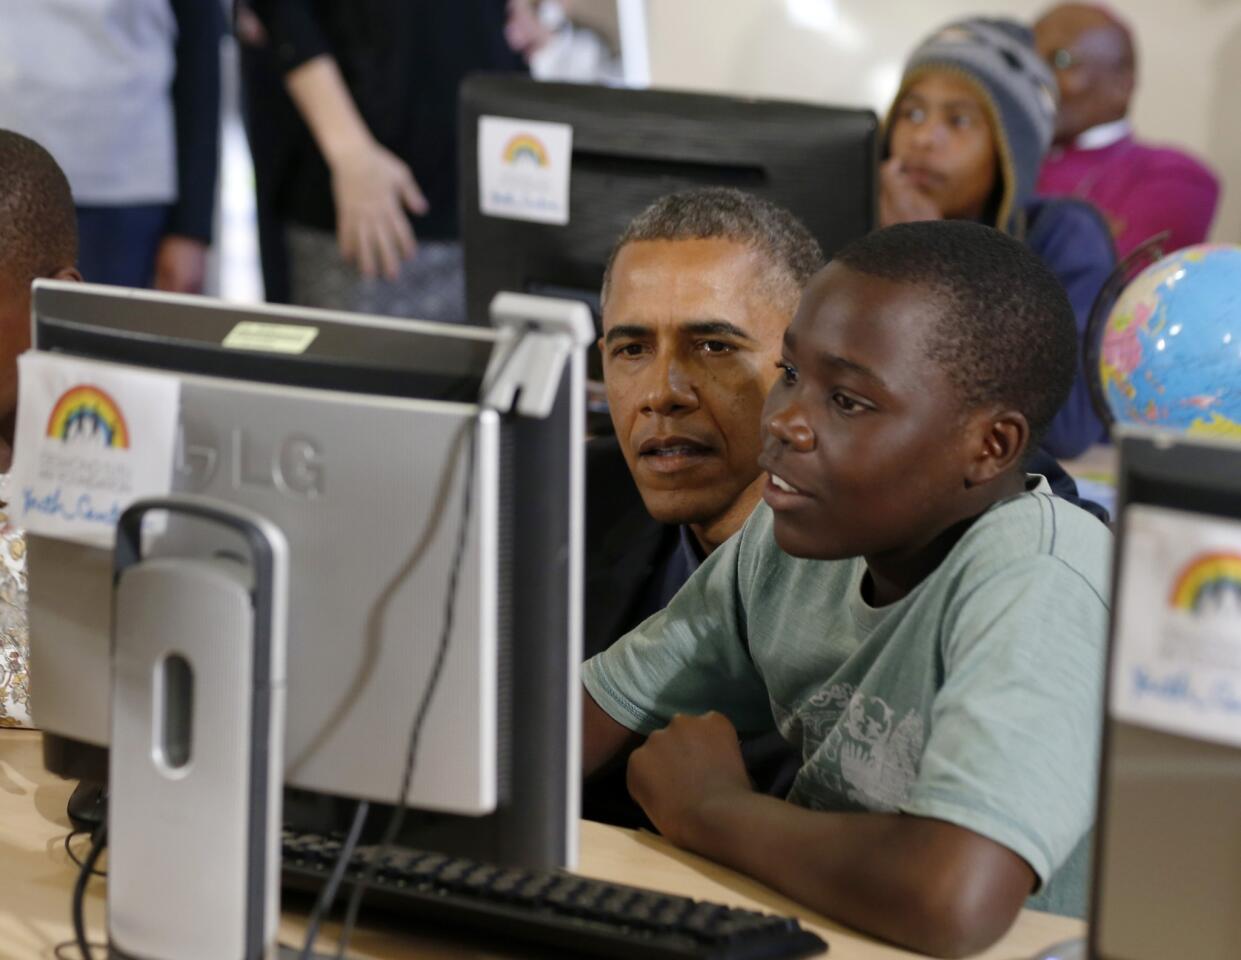 U.S. President Barack Obama looks at a computer with youth as he tours the Desmond Tutu HIV Foundation Youth Centre and takes part in a health event in Cape Town